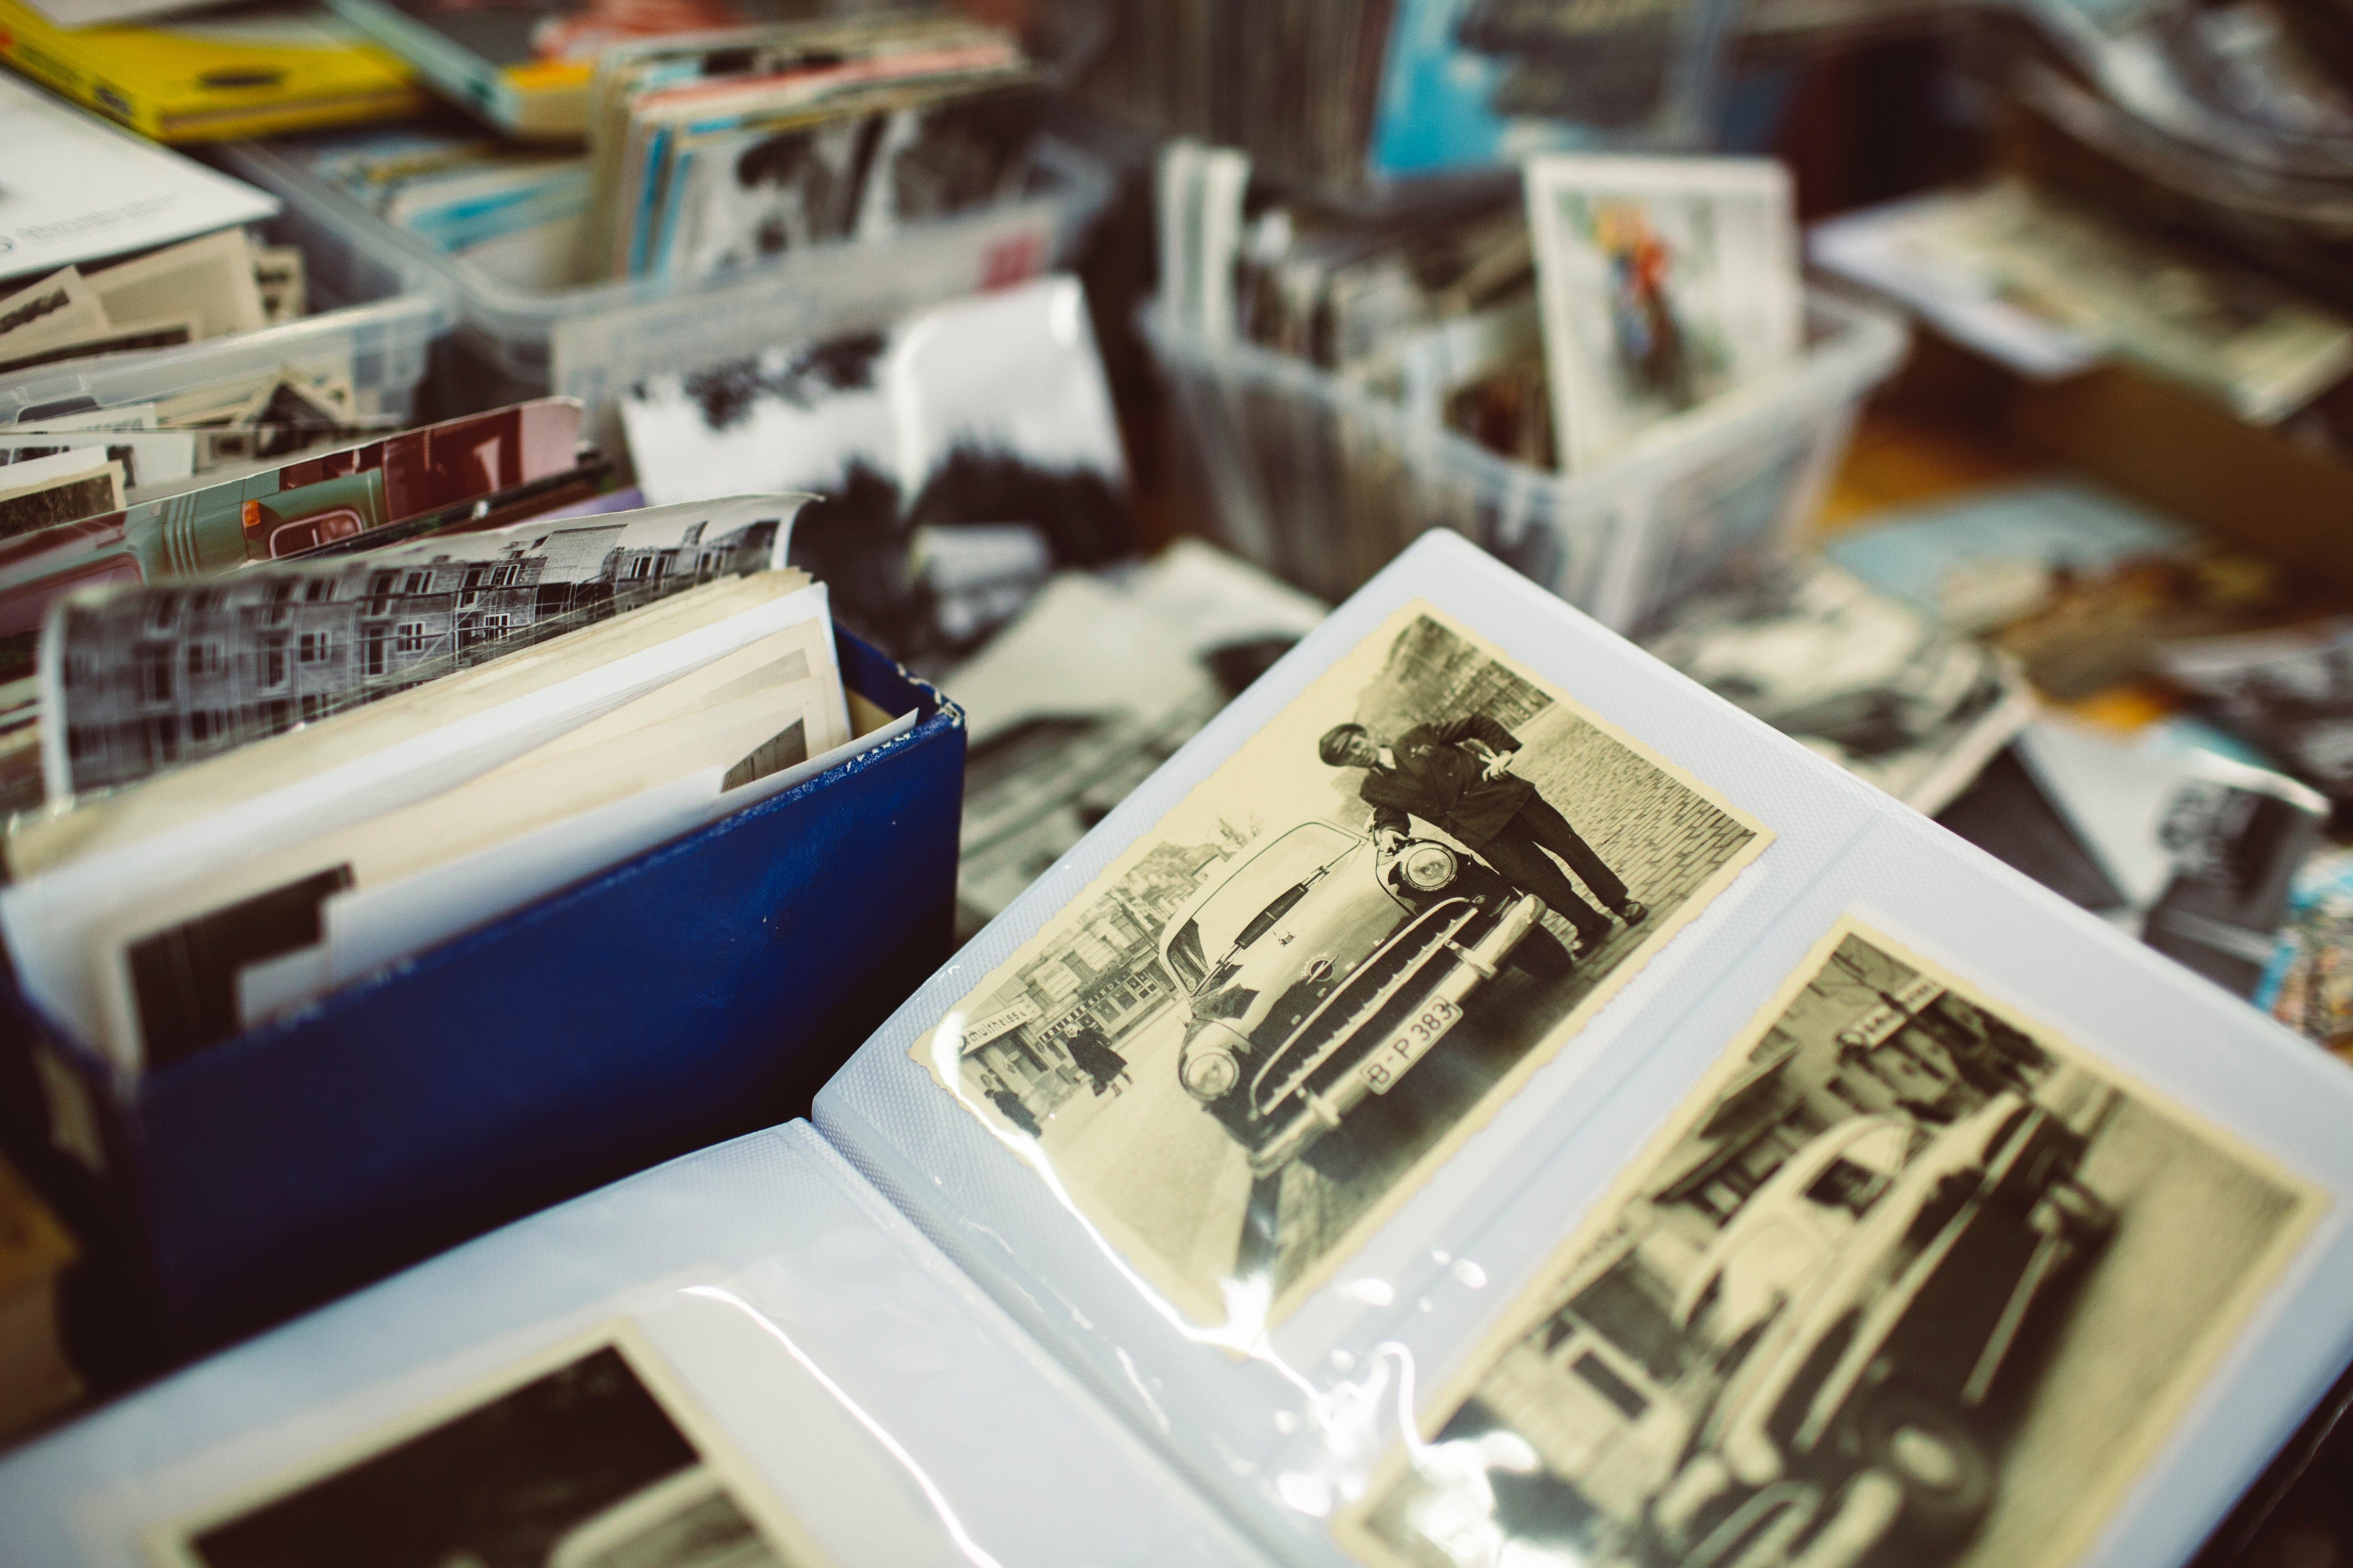 vienrose-blog-physical-photo-albums-to-collect-tangible-memories